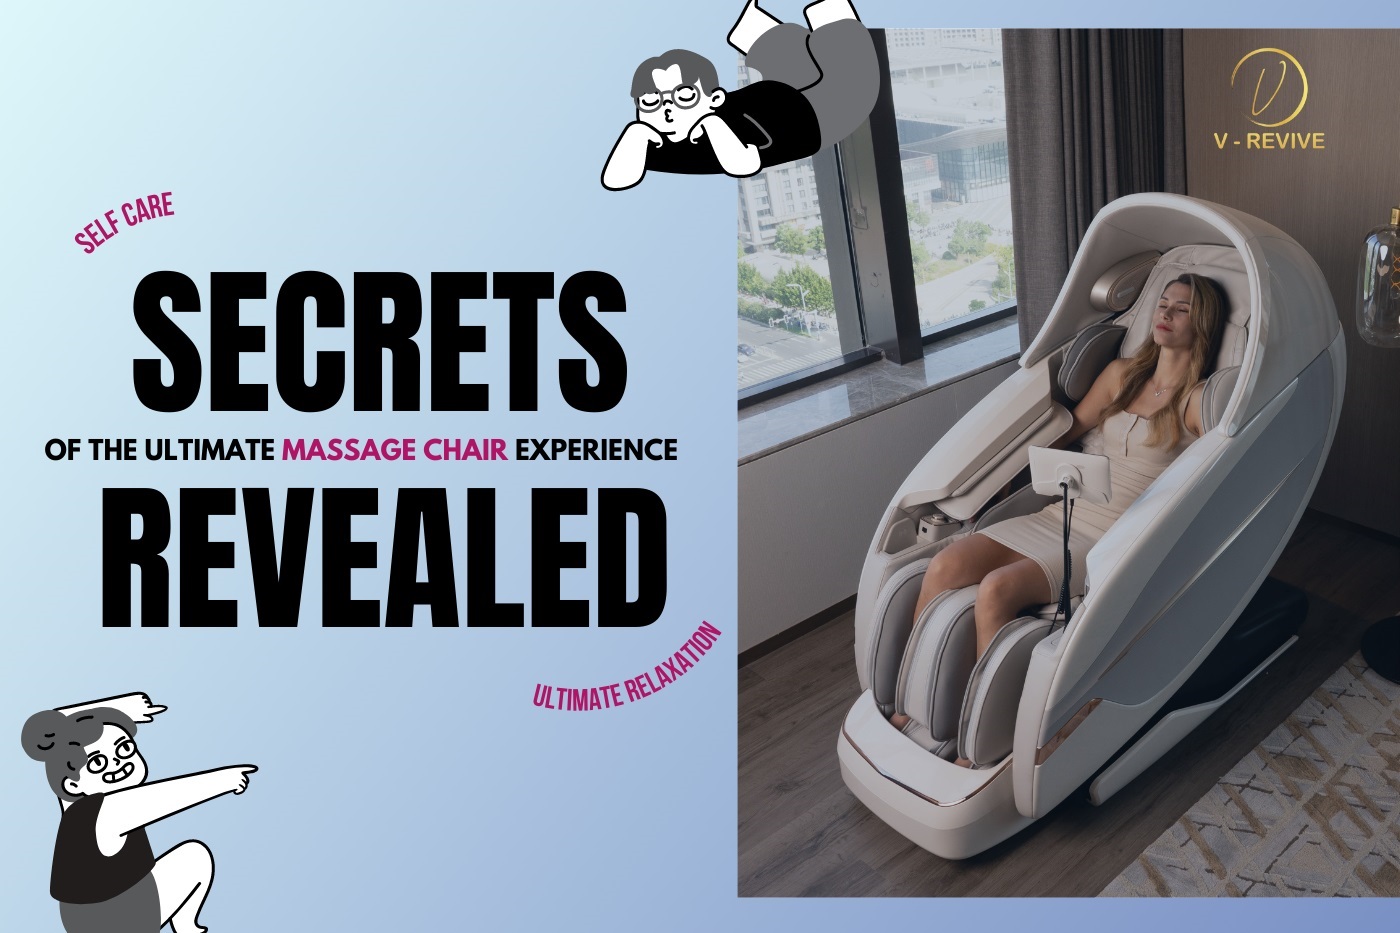 Secrets-of-the-Ultimate-Massage-Chair-Experience-Revealed